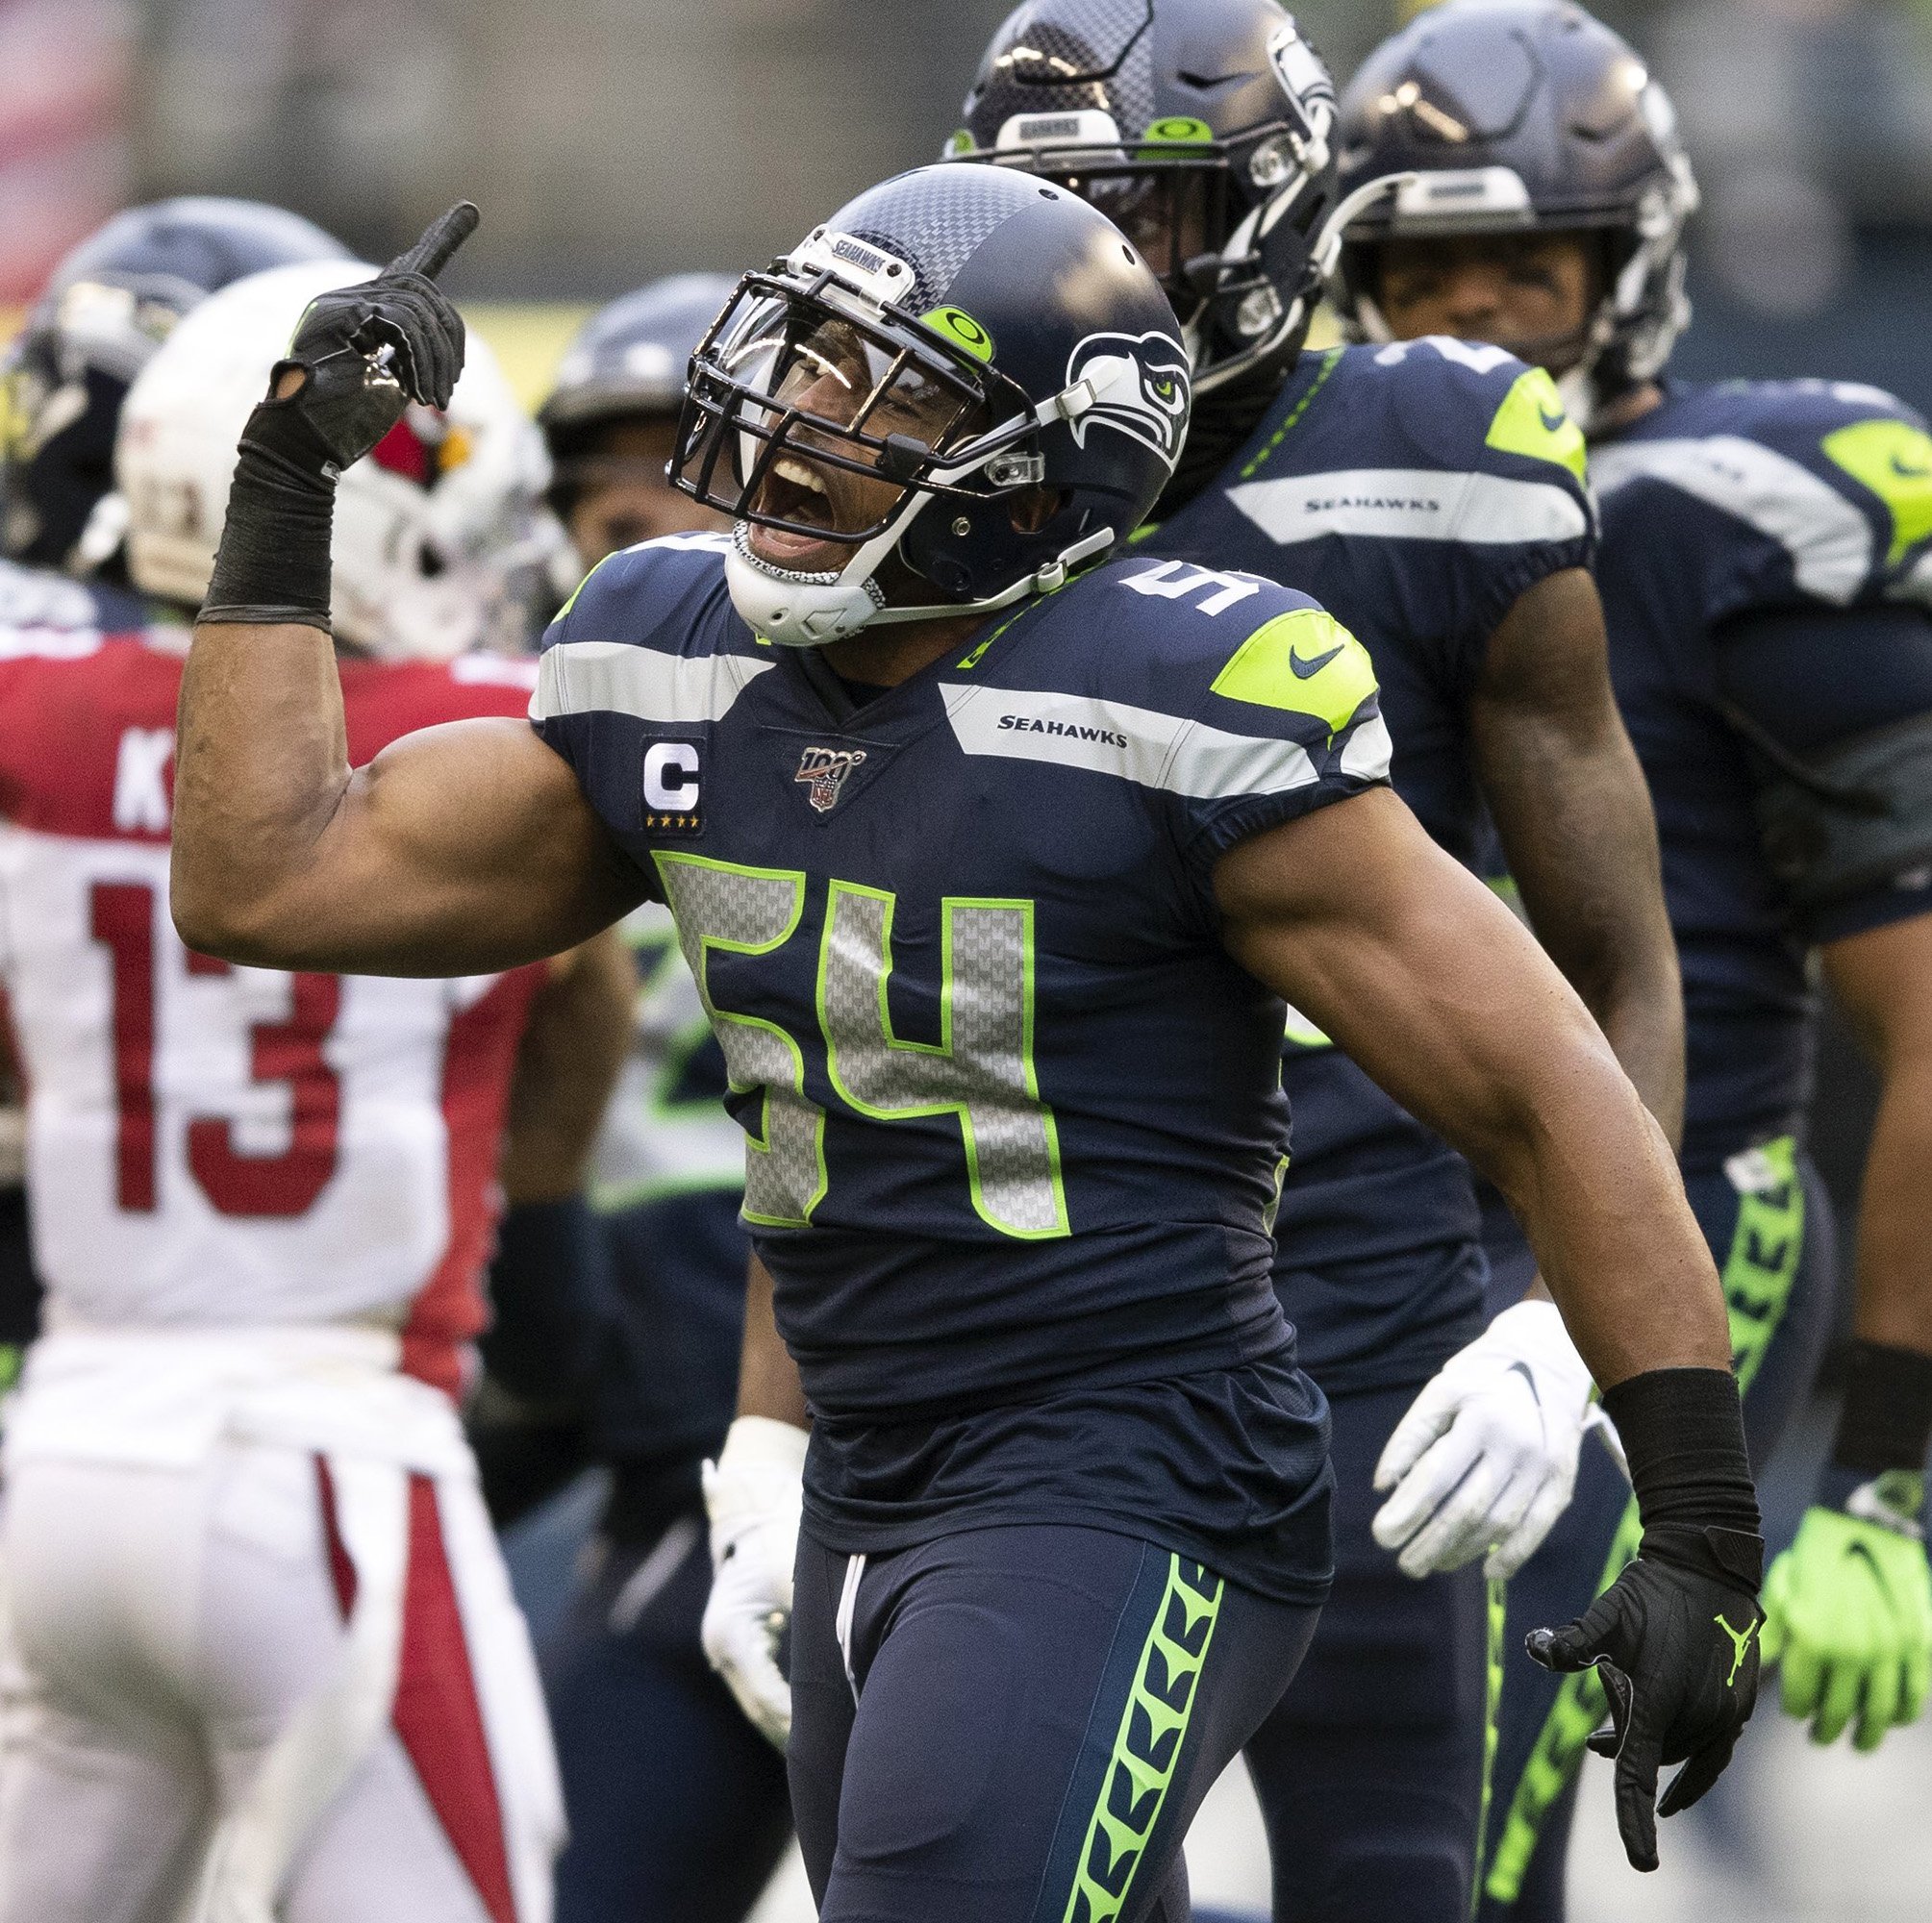 Linebacker Bobby Wagner returning to Seahawks after year with Rams